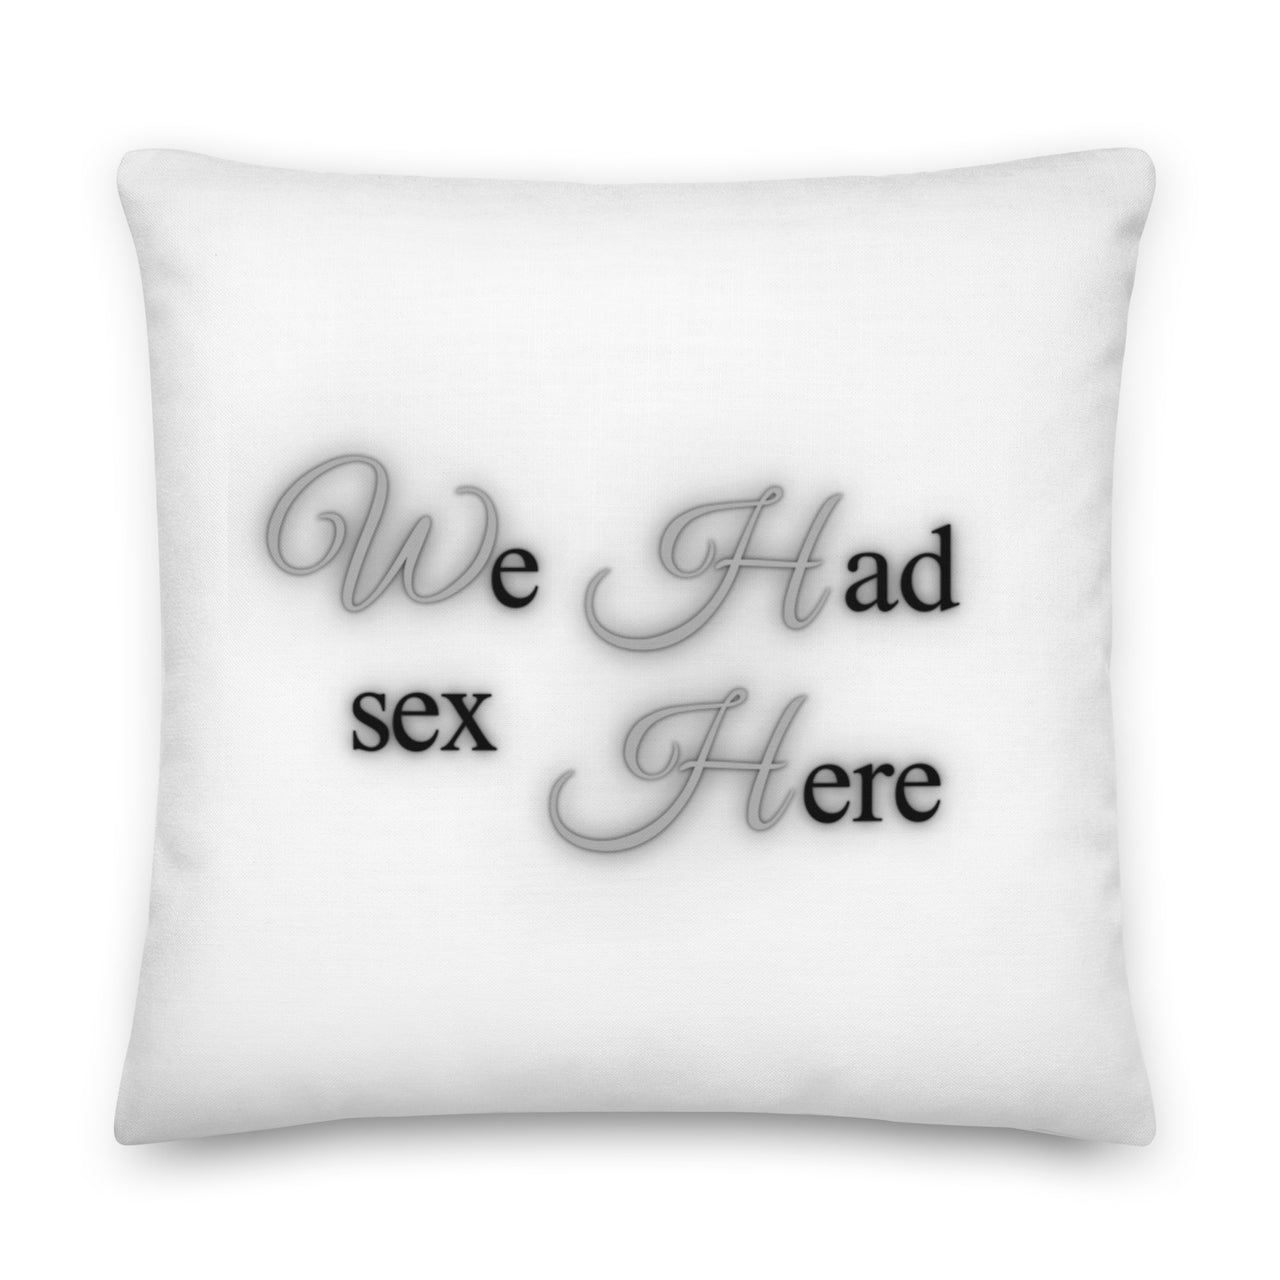 We Had Sex Here And Here Reversable Premium Pillow